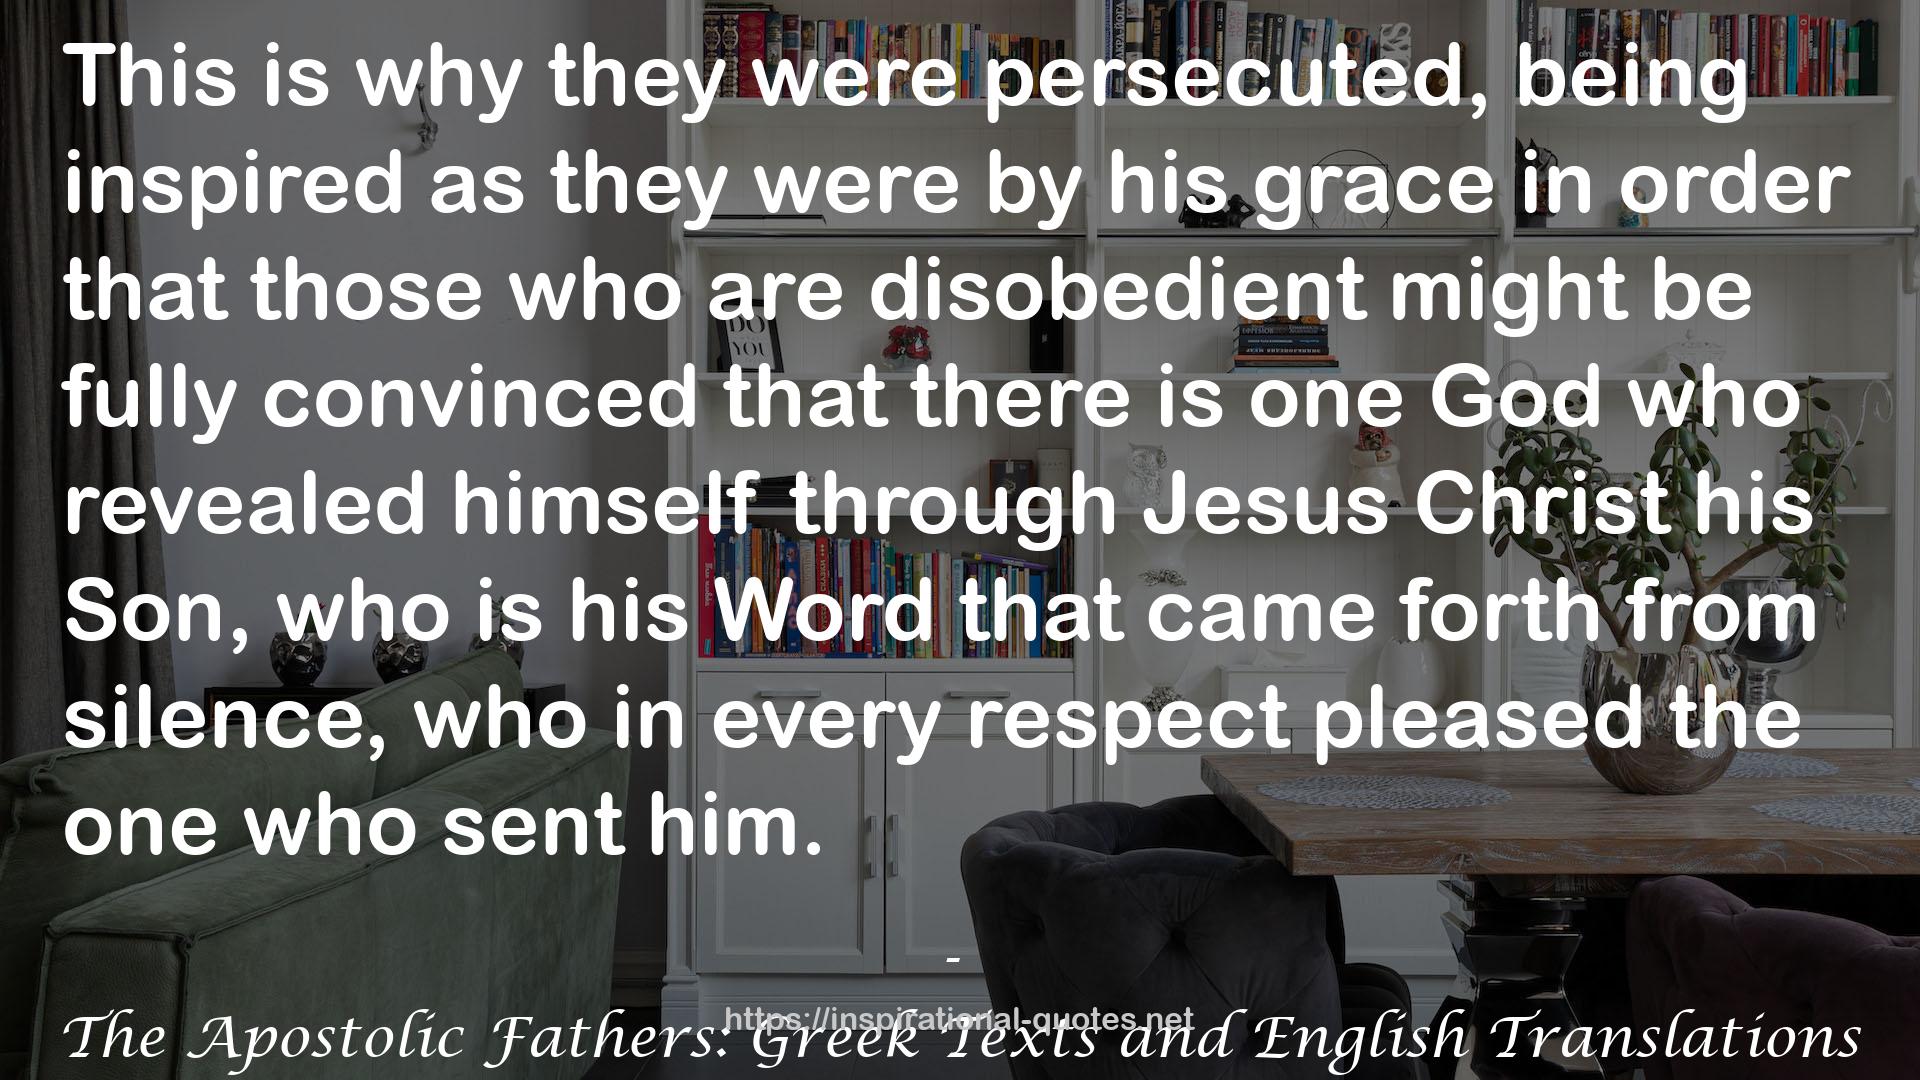 The Apostolic Fathers: Greek Texts and English Translations QUOTES